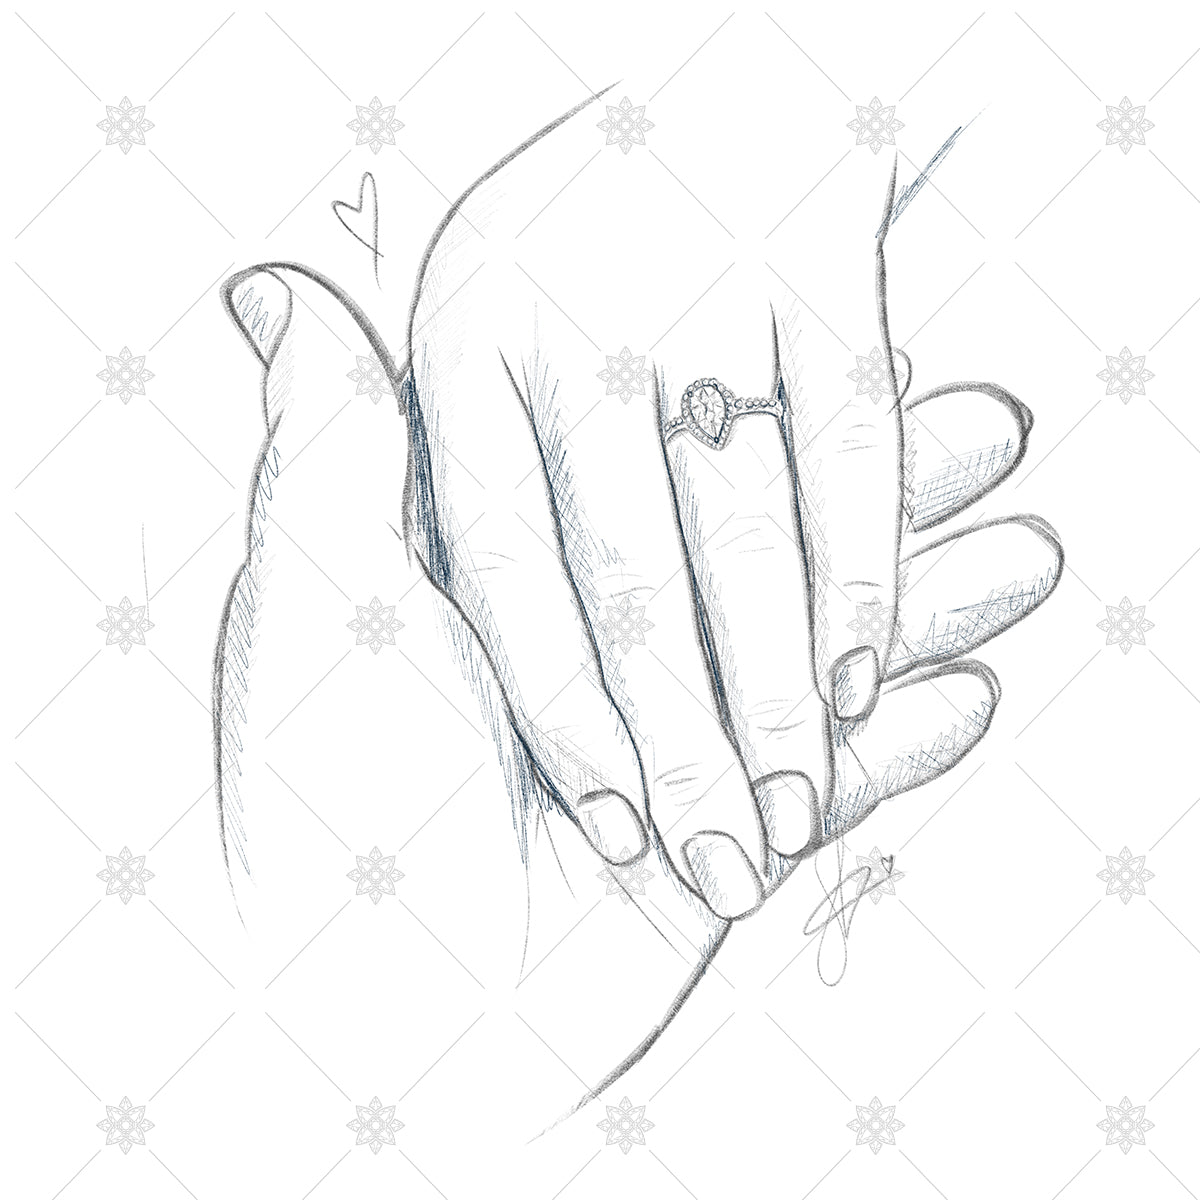 How to draw Holding Hands/Holding Hands pencil sketch - YouTube